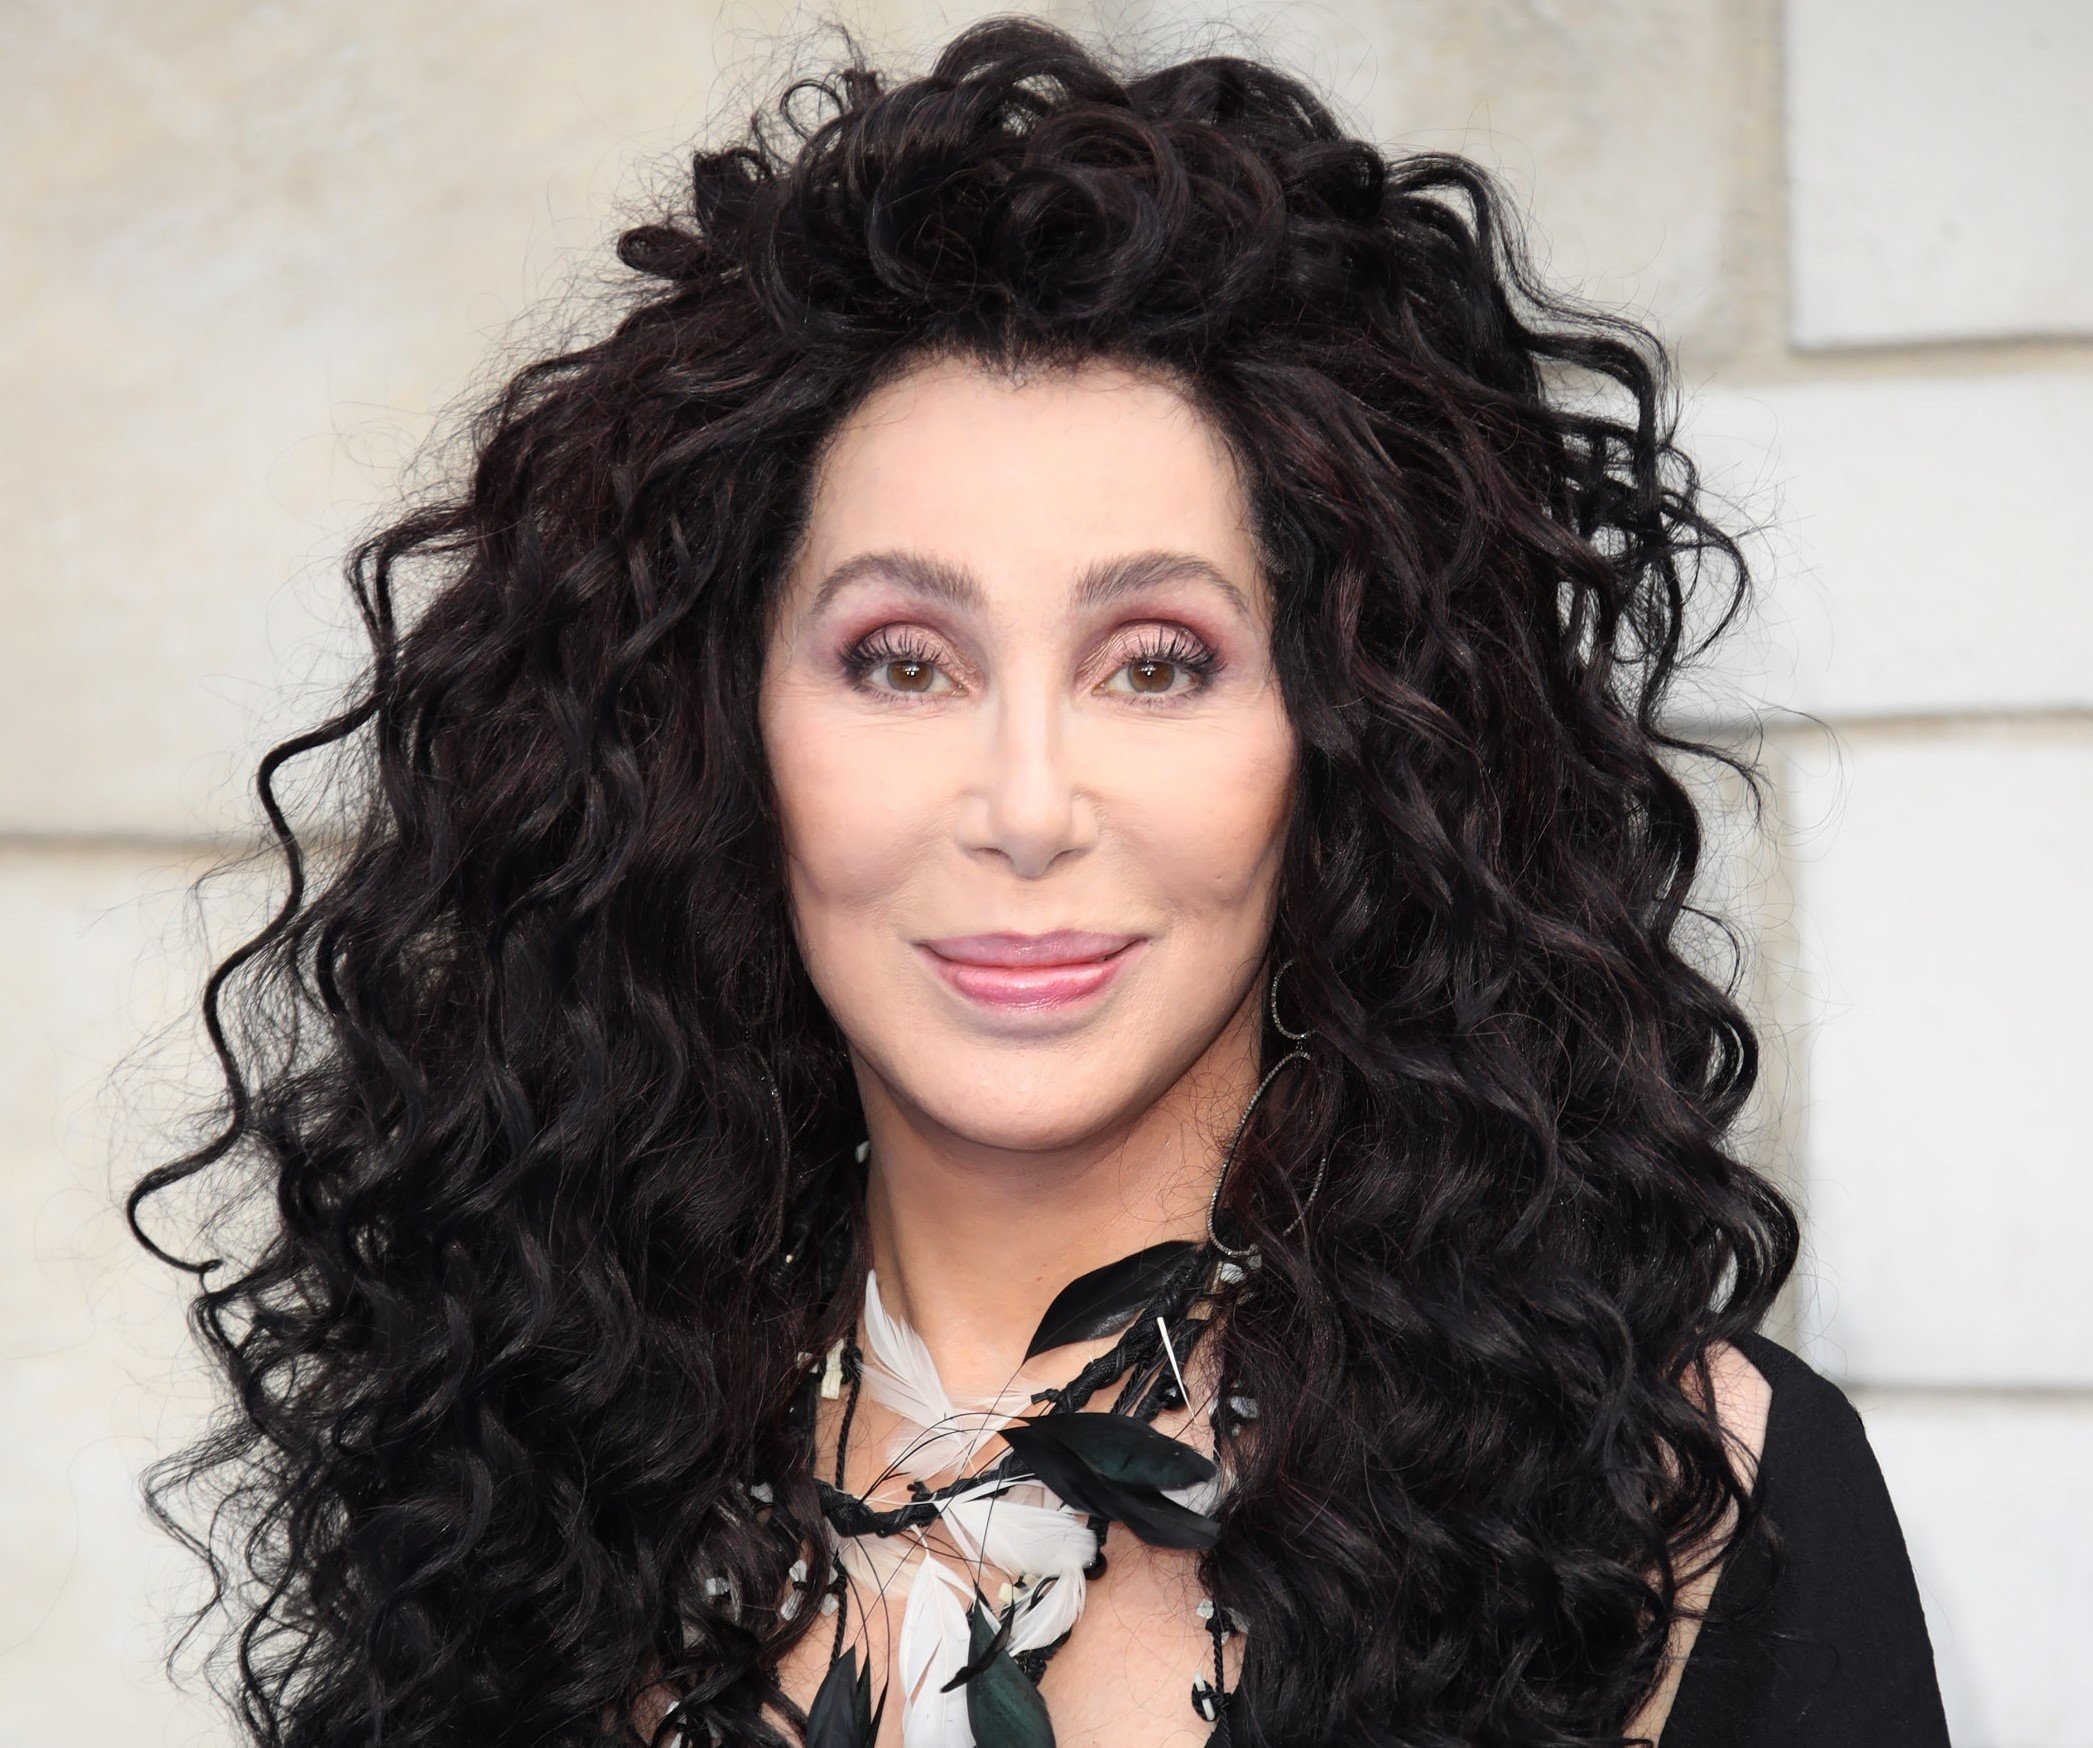 Does Cher Wear a Wig?